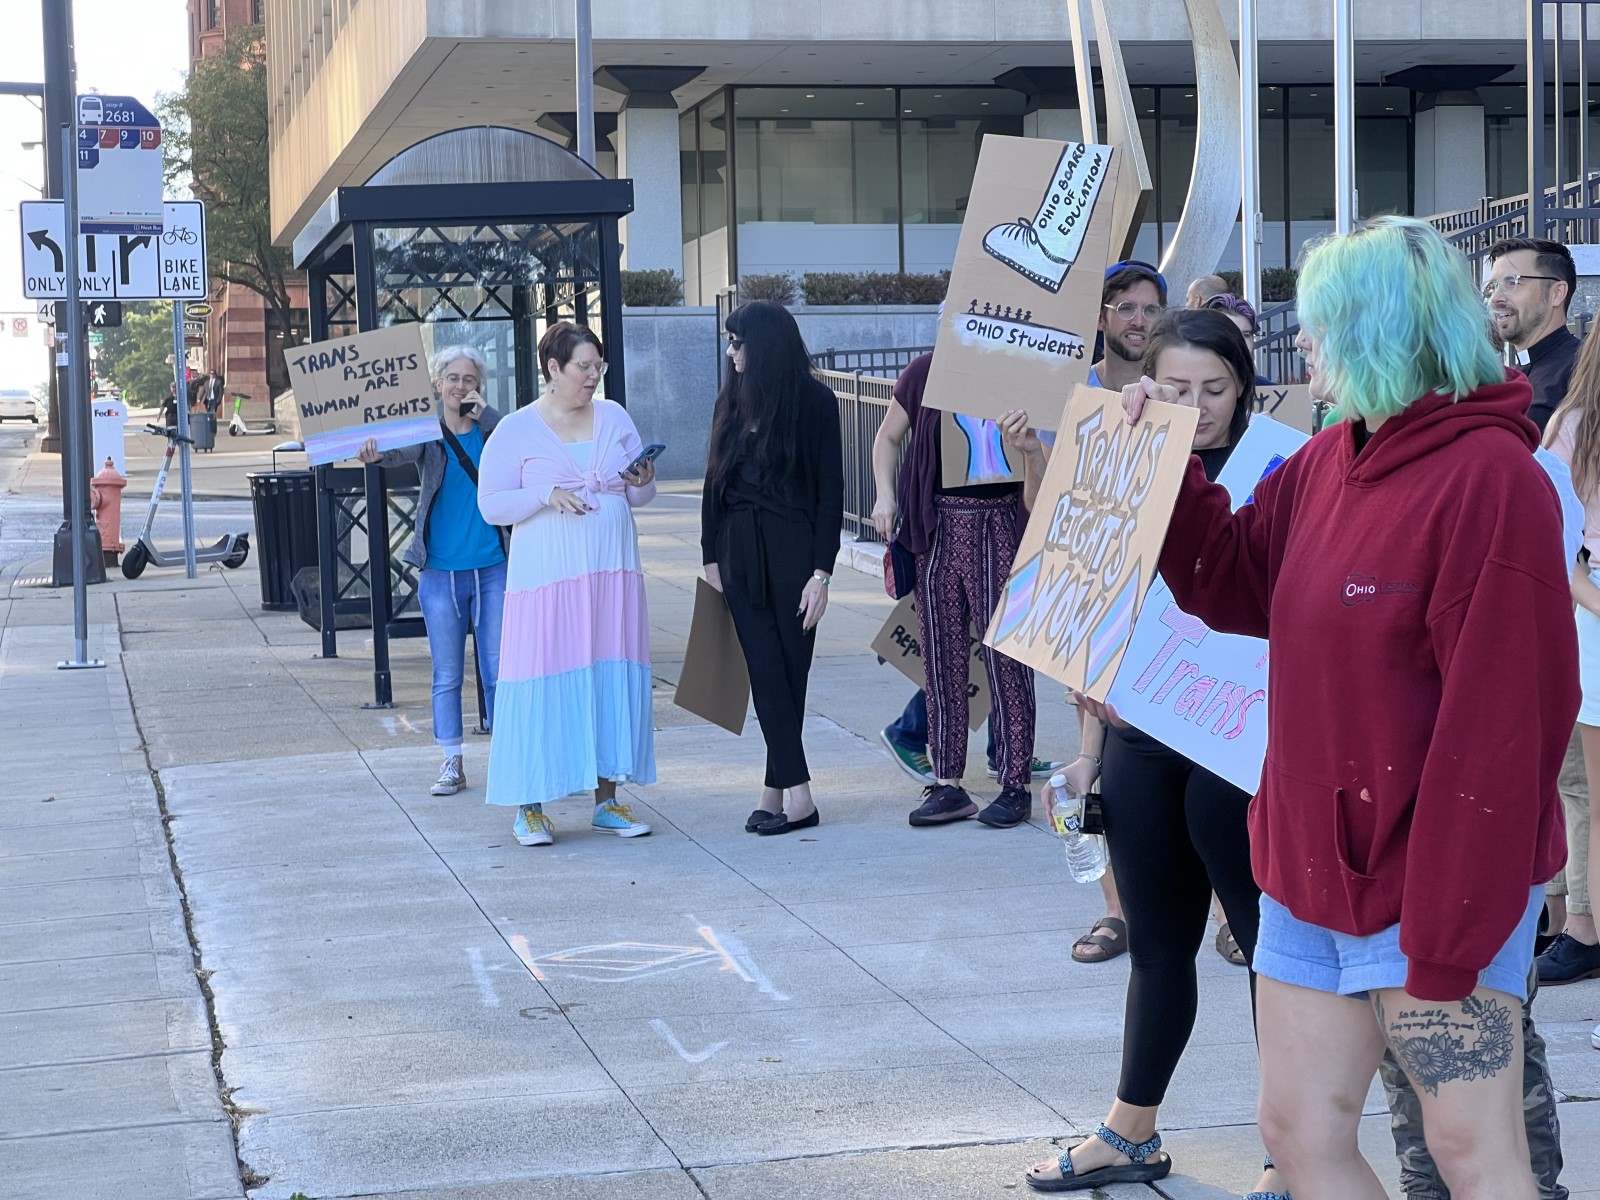 Protesters advocating for the rights of trans students at the Ohio State Board of Education